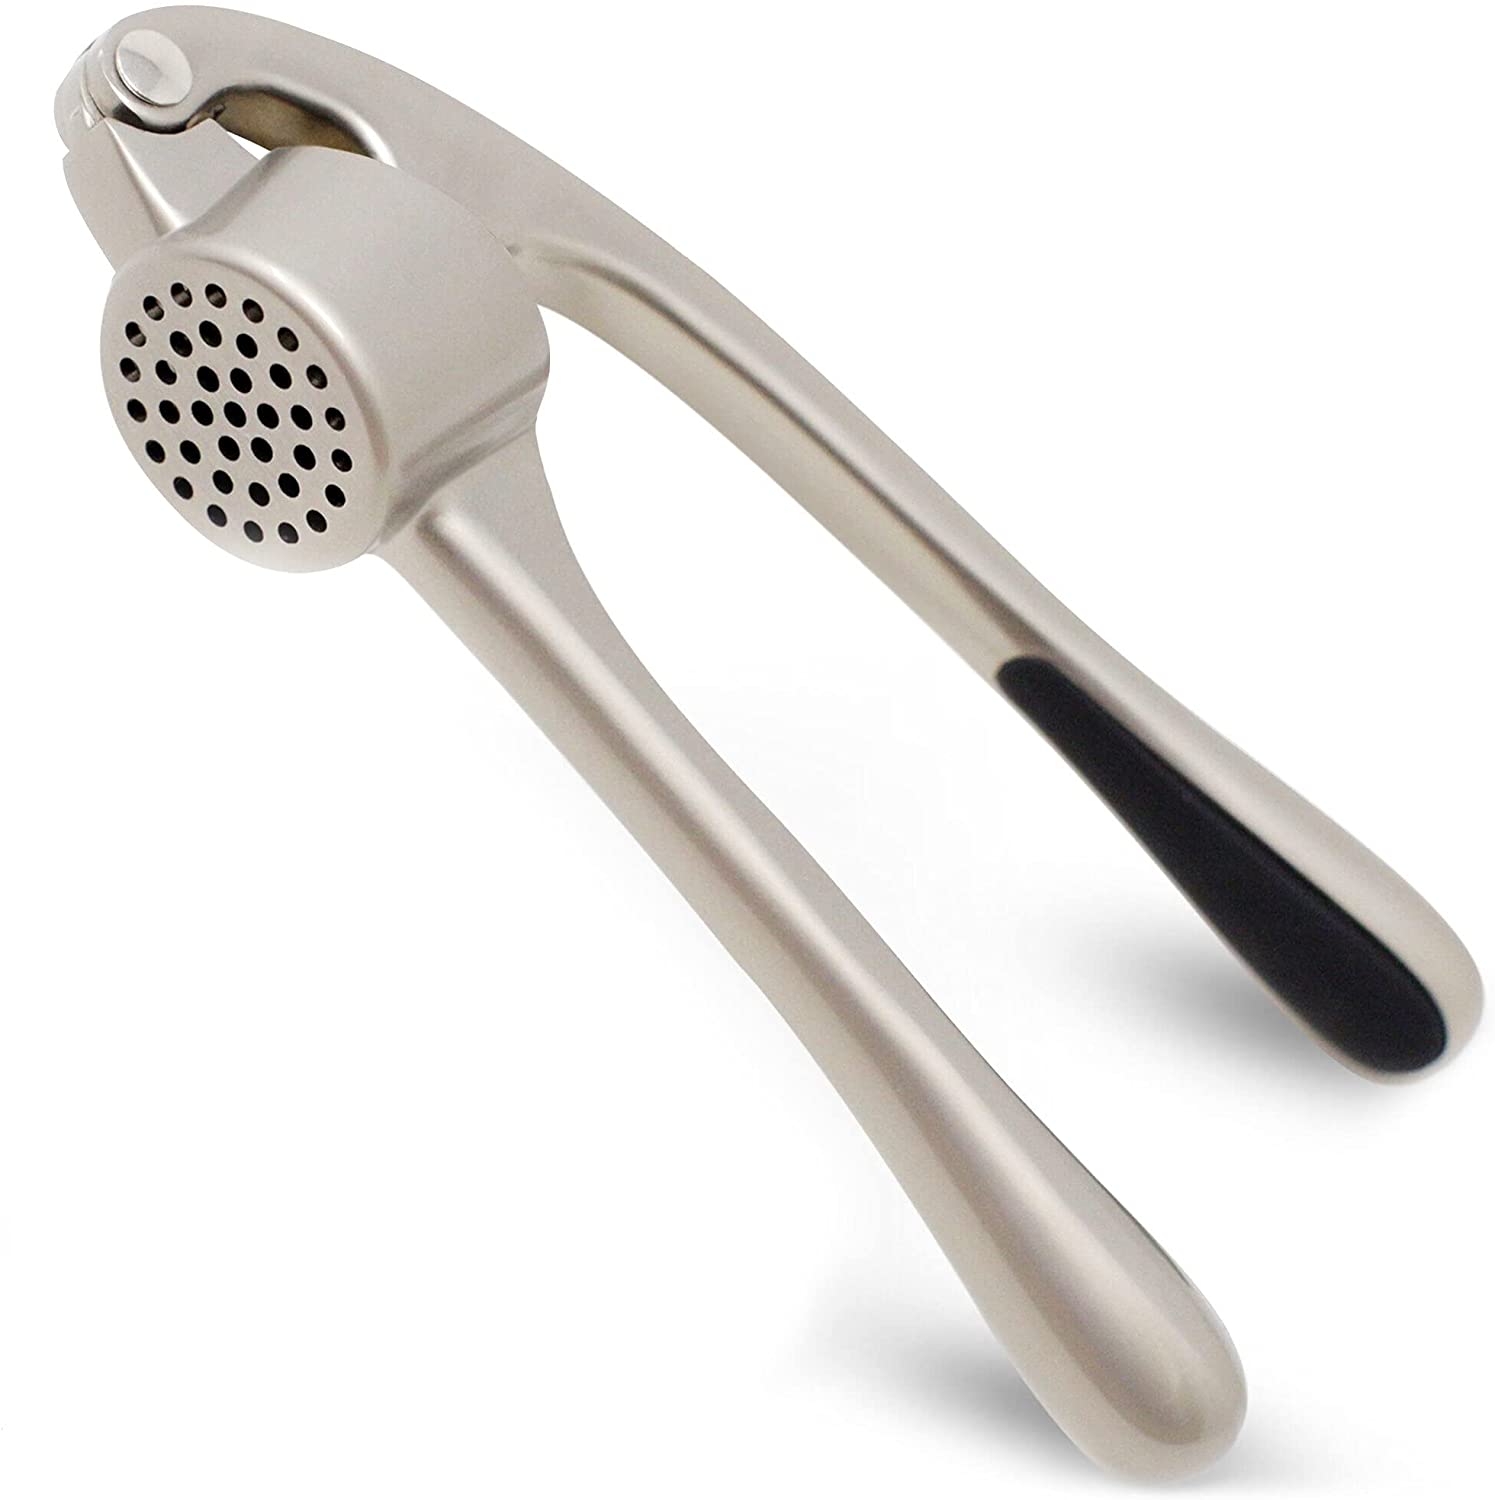 Kindsells New Kitchen Stainless Steel Garlic Press Daily Useful Cooking Tools Garlic Presses